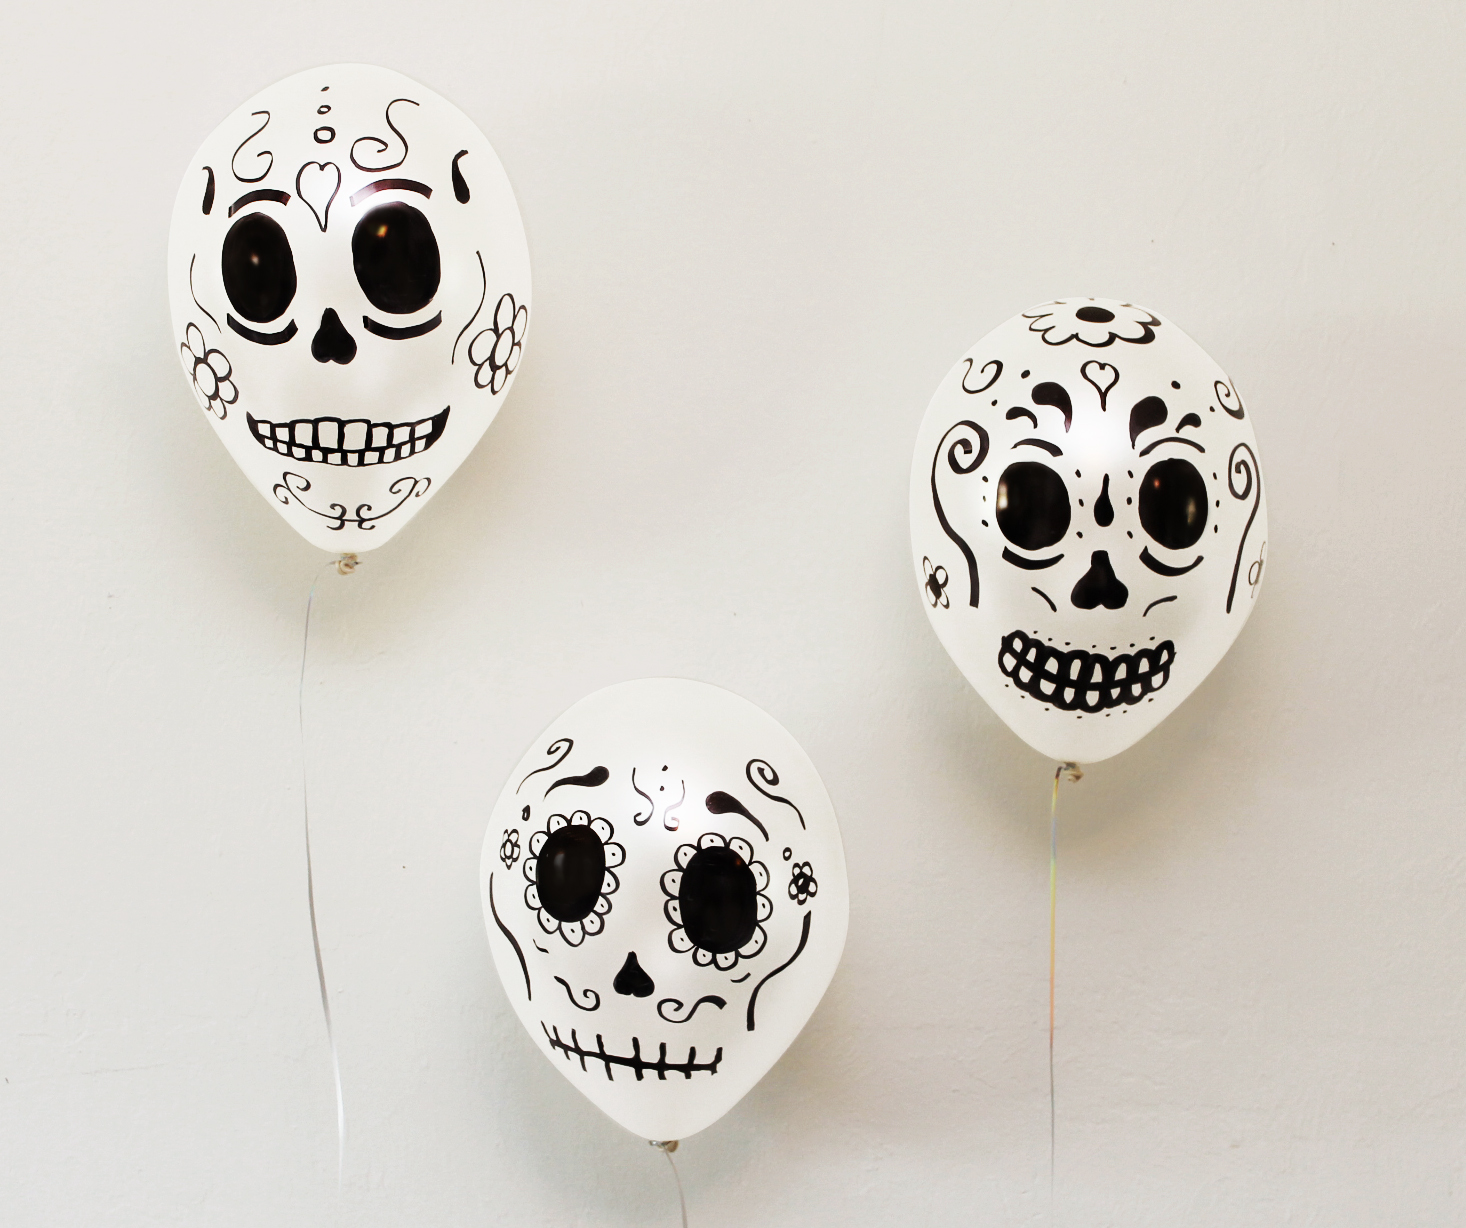  Day of the Dead DIY, DIY Projects, Day of the Dead Party Ideas, Fall Holiday, Halloween, Halloween Party Ideas, DIY Holiday Projects, How to Celebrate Day of the Dead